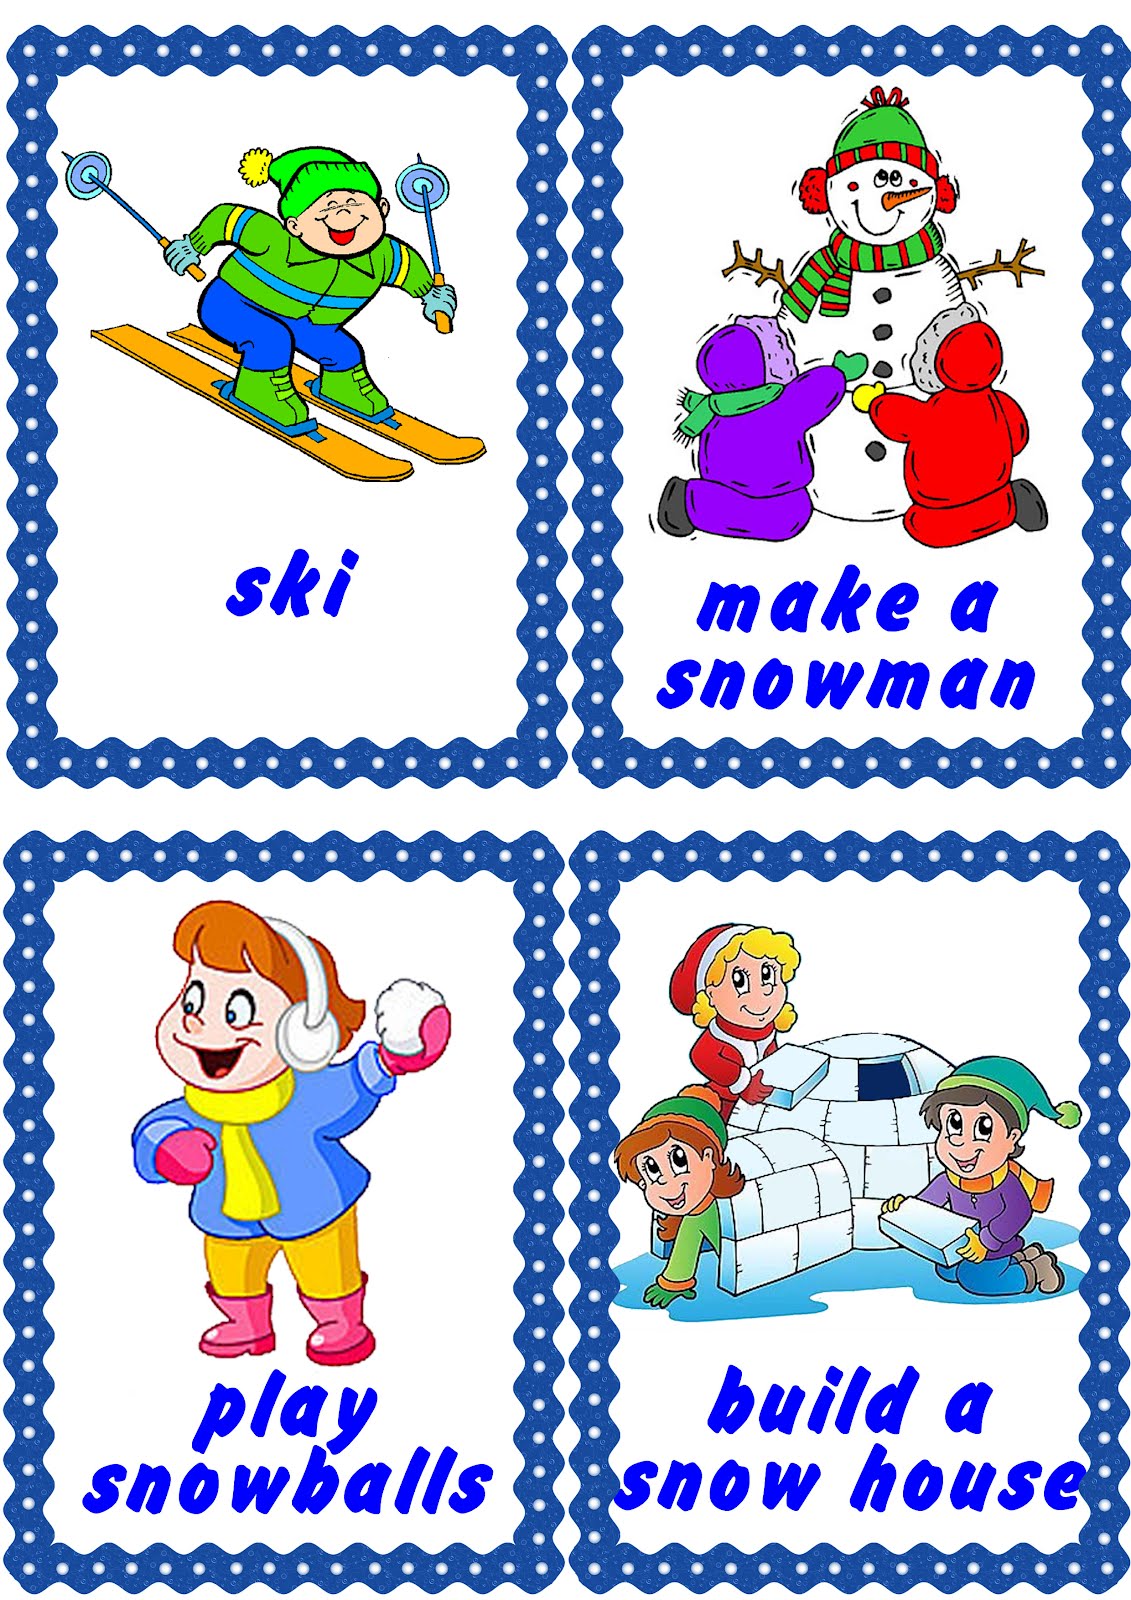 Here Are Some Flashcards To Remember Snow Activities 